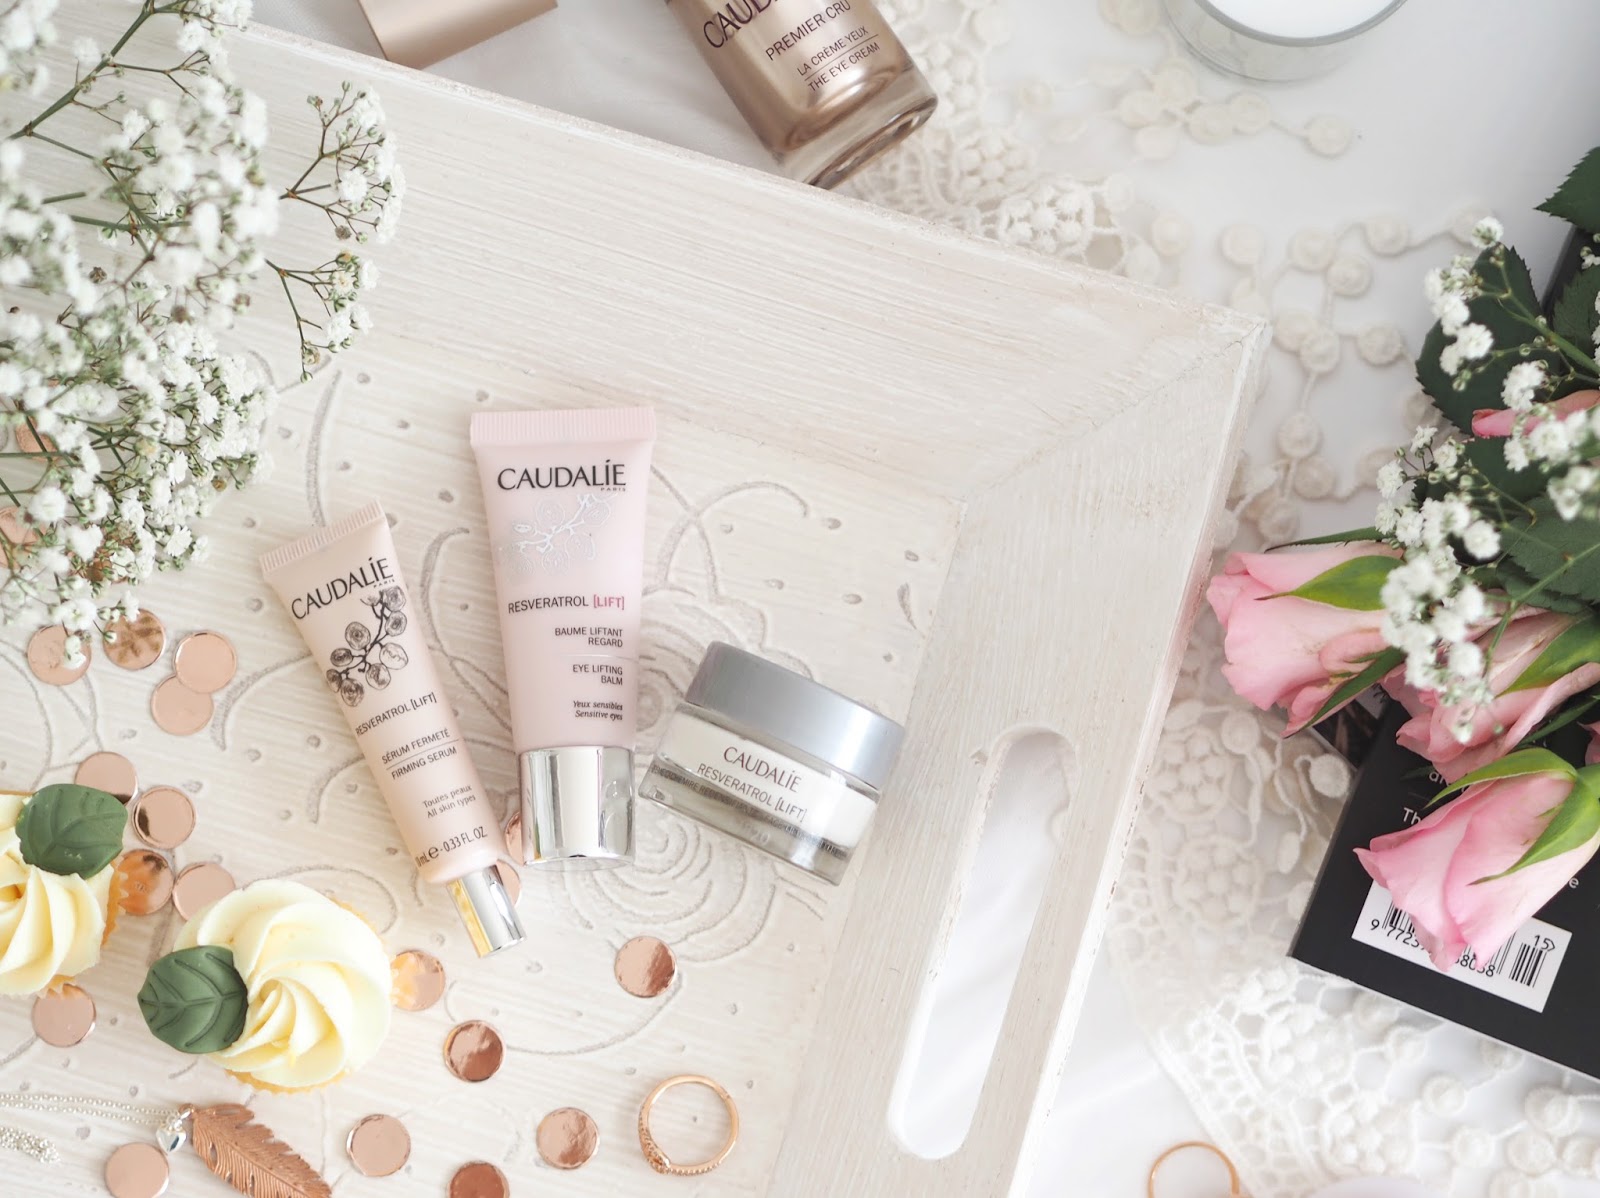 Introducing an Hour of Caudalie Skincare on QVC, Katie Kirk Loves, UK Blogger, Beauty Blogger, Skincare Blogger, Beauty Review, Skincare Review, Caudalie Skincare, QVC Beauty, QVC UK, Caudalie on QVC, Caudalie Beauty, Caudalie Products